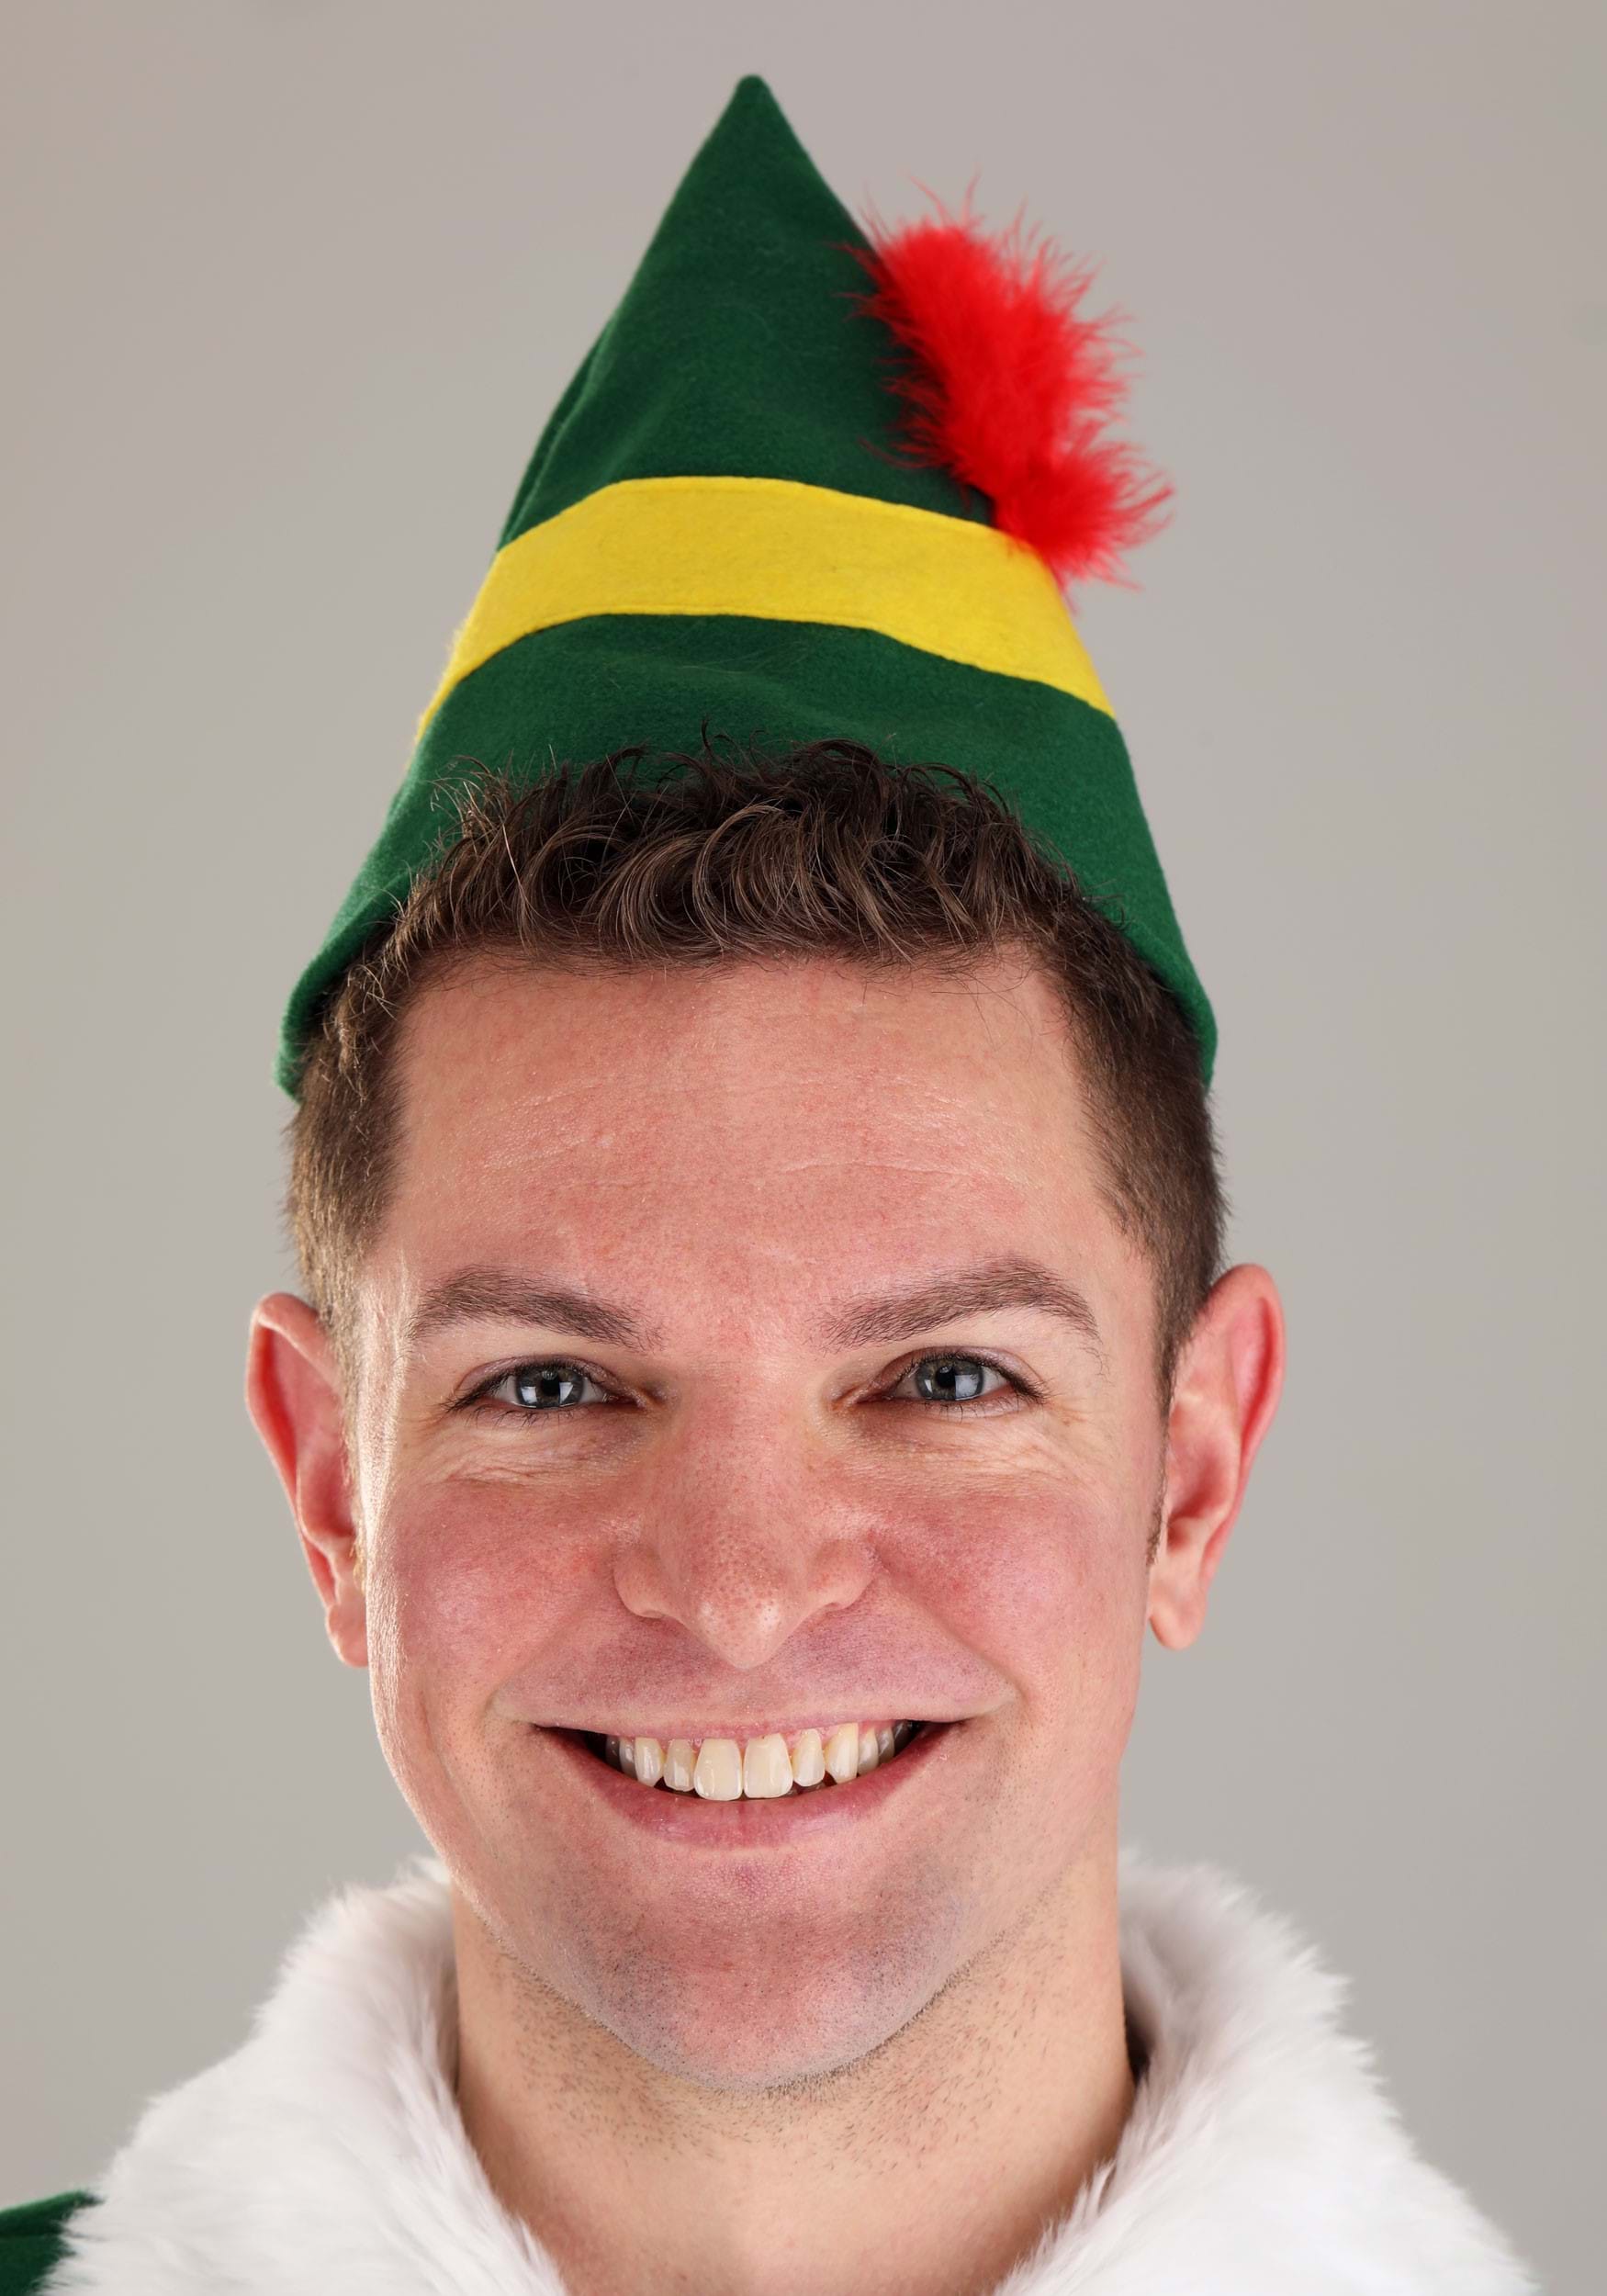 Authentic Buddy The Elf Adult Outfit